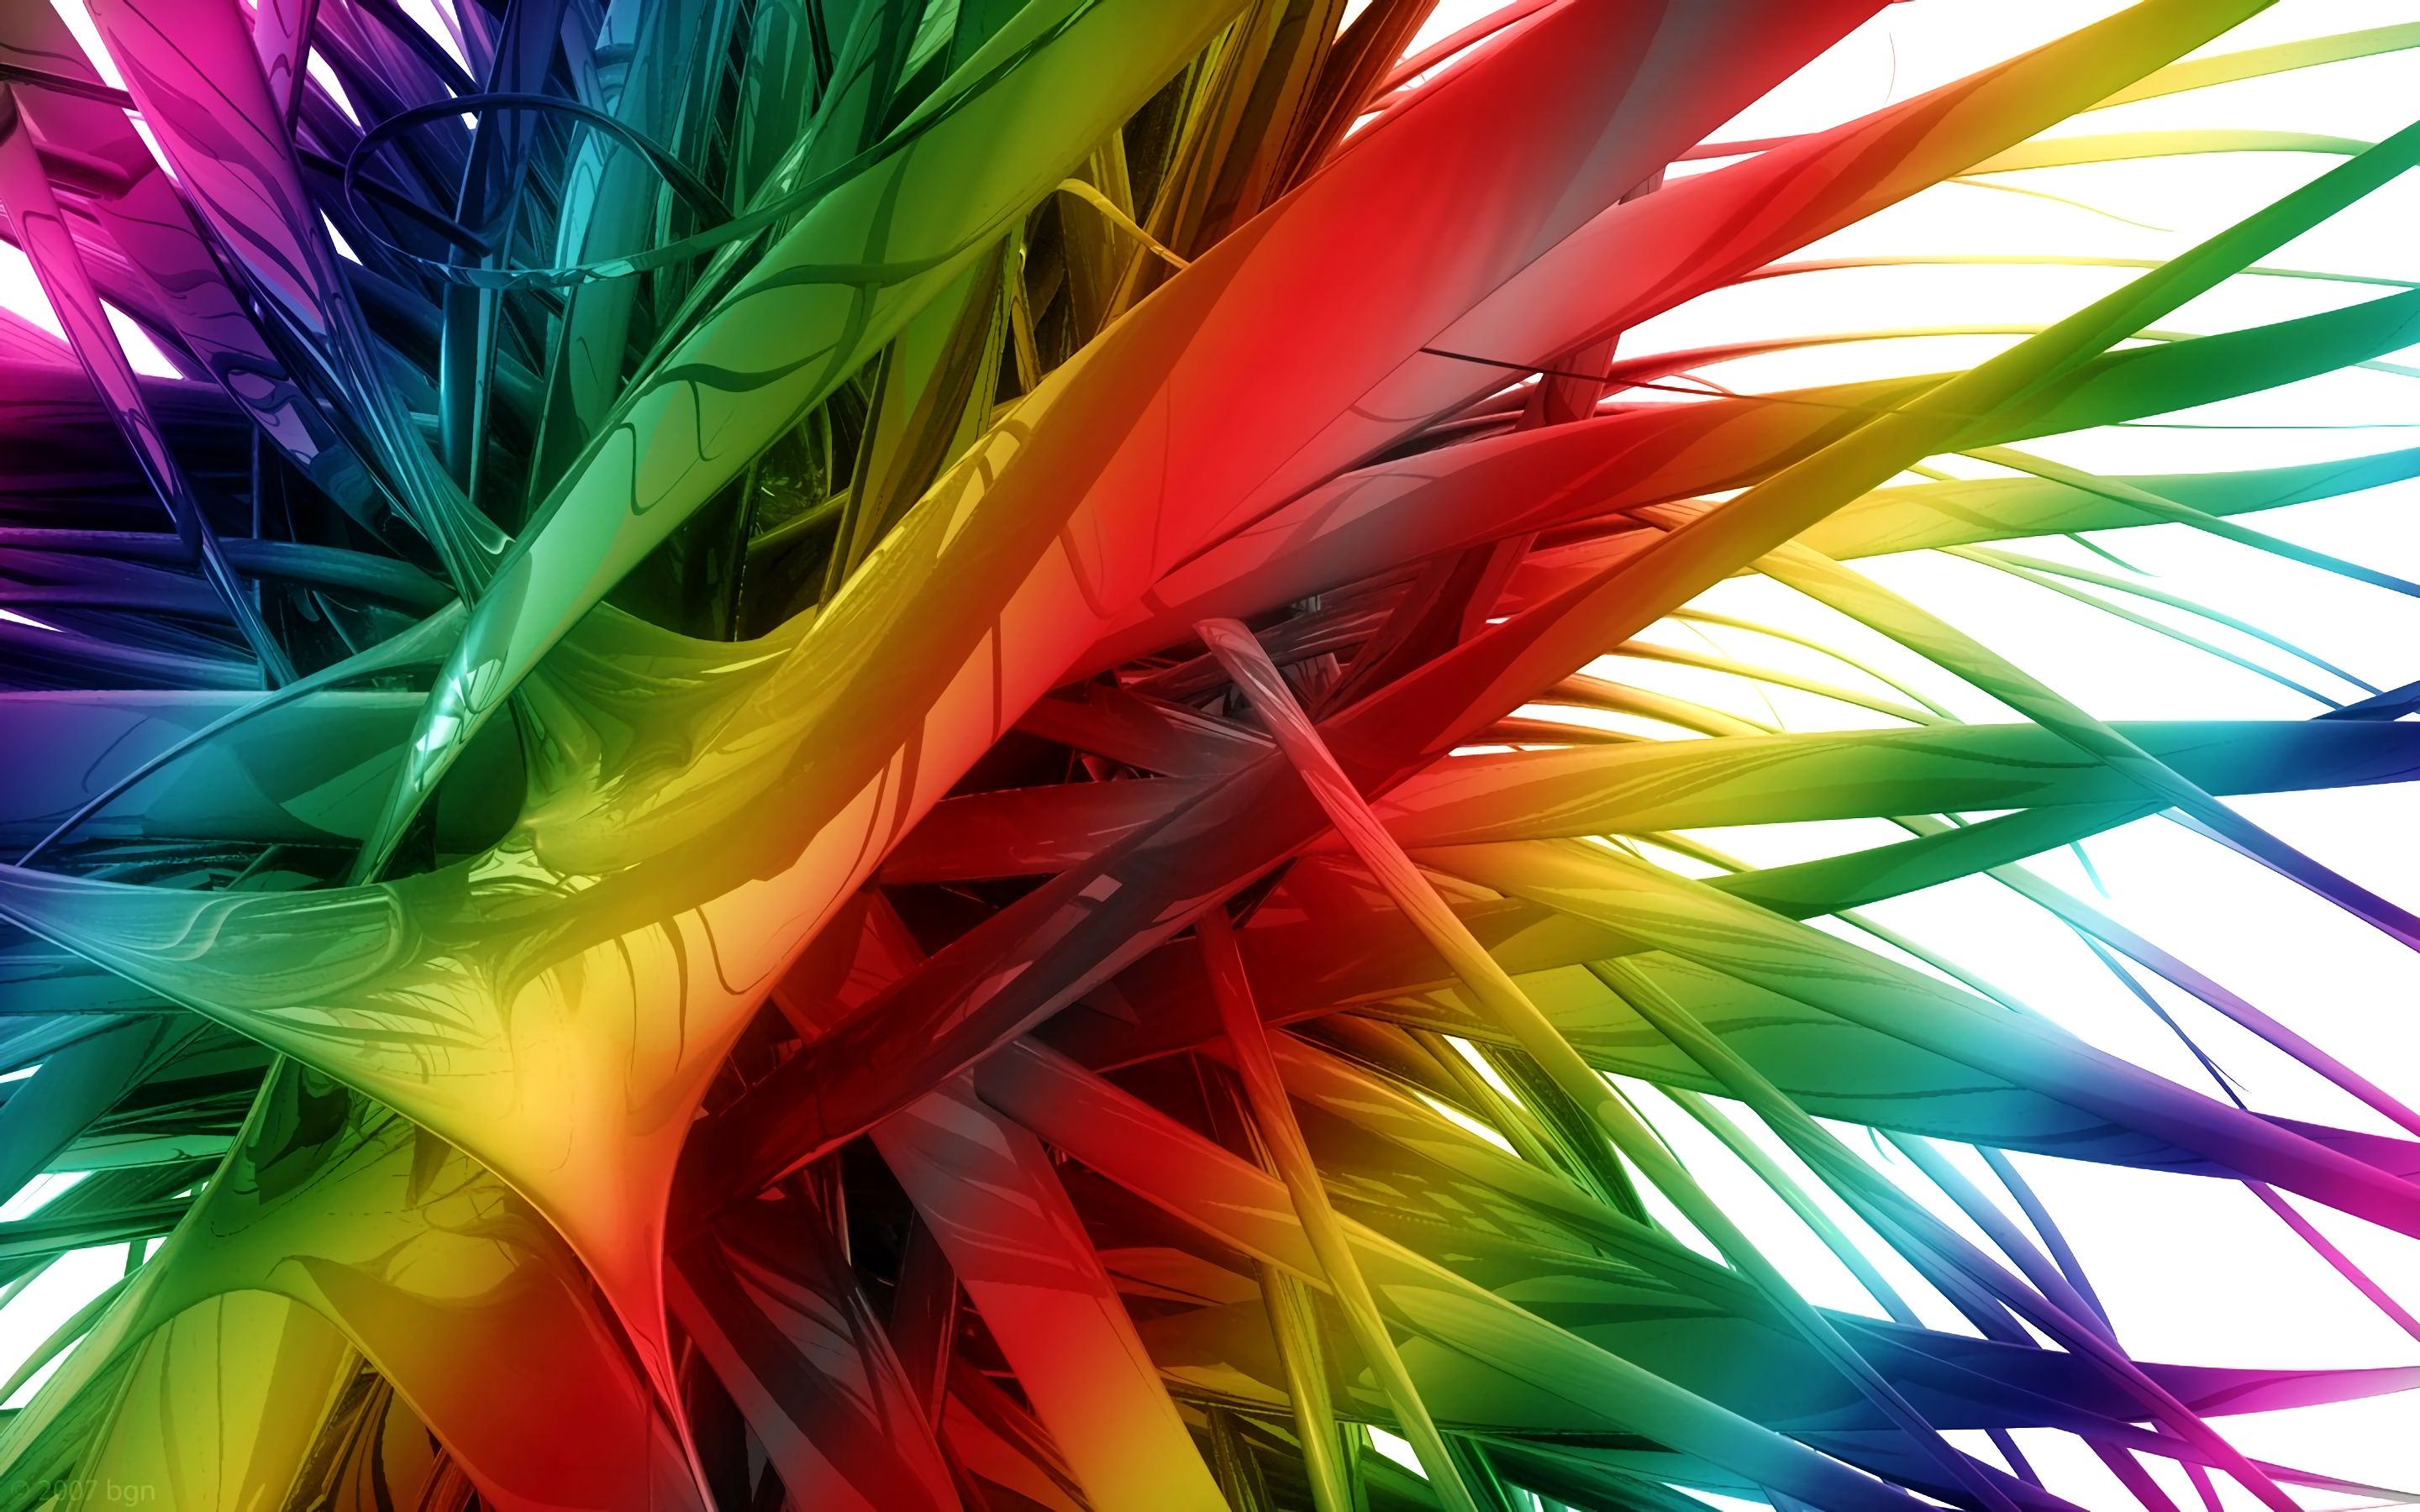 3d, abstract, cgi, colorful, cool wallpaper for mobile